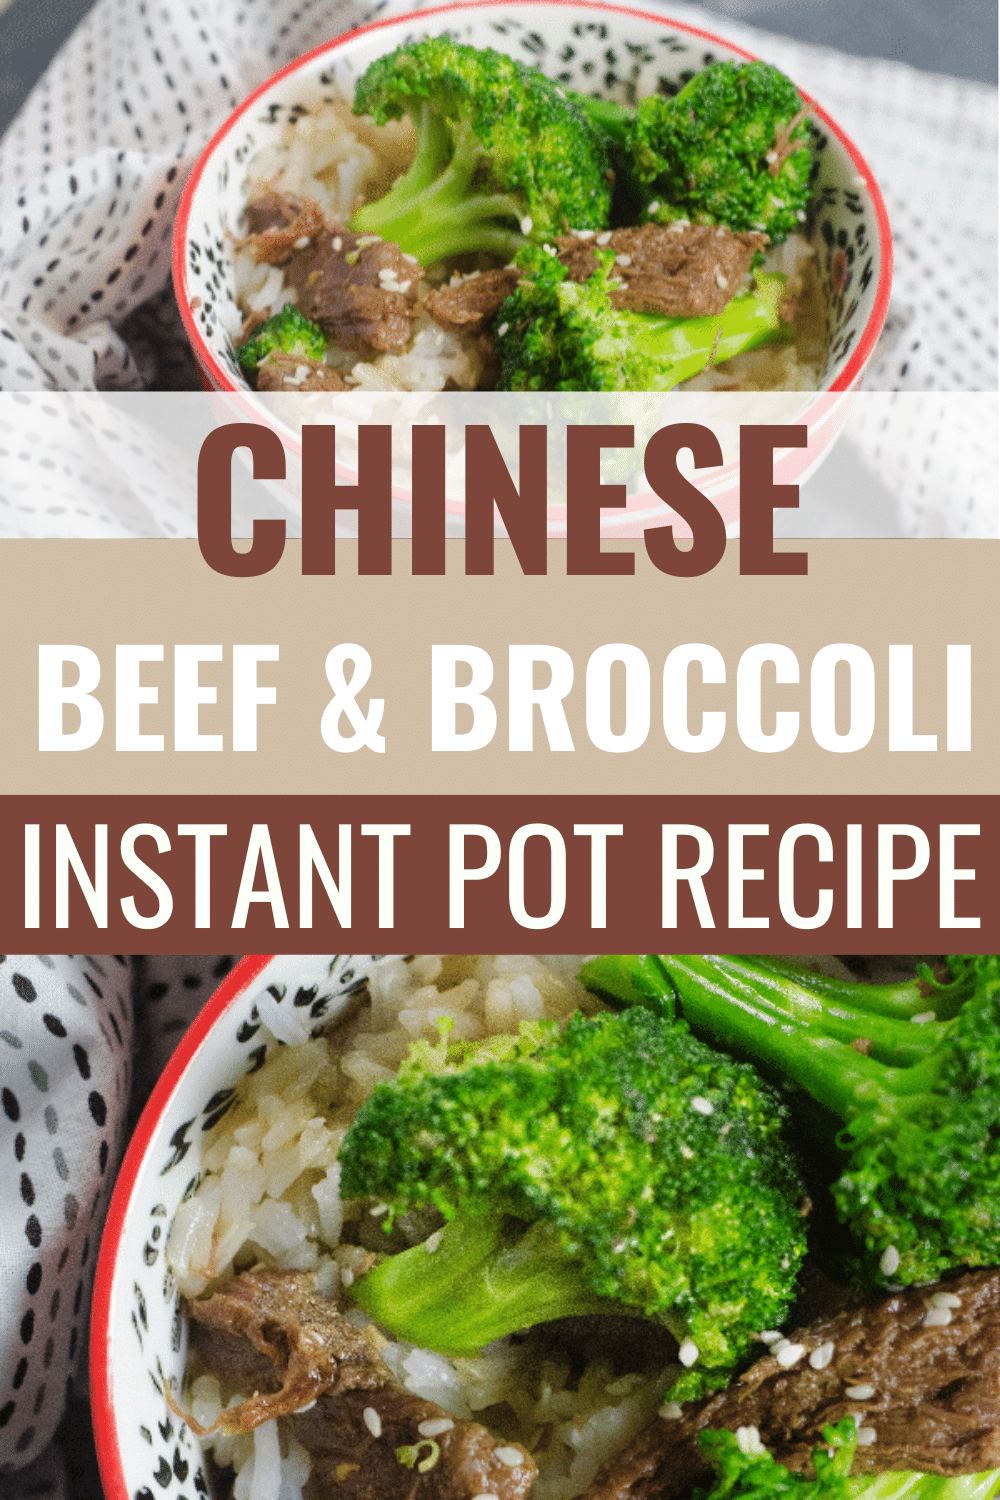 This Instant Pot Chinese Beef and Broccoli is such an easy meal to make and it's so yummy! It's the perfect meal for busy weeknights. #instantpotrecipes #chineserecipes #beef #pressurecooker #wondermomwannabe via @wondermomwannab